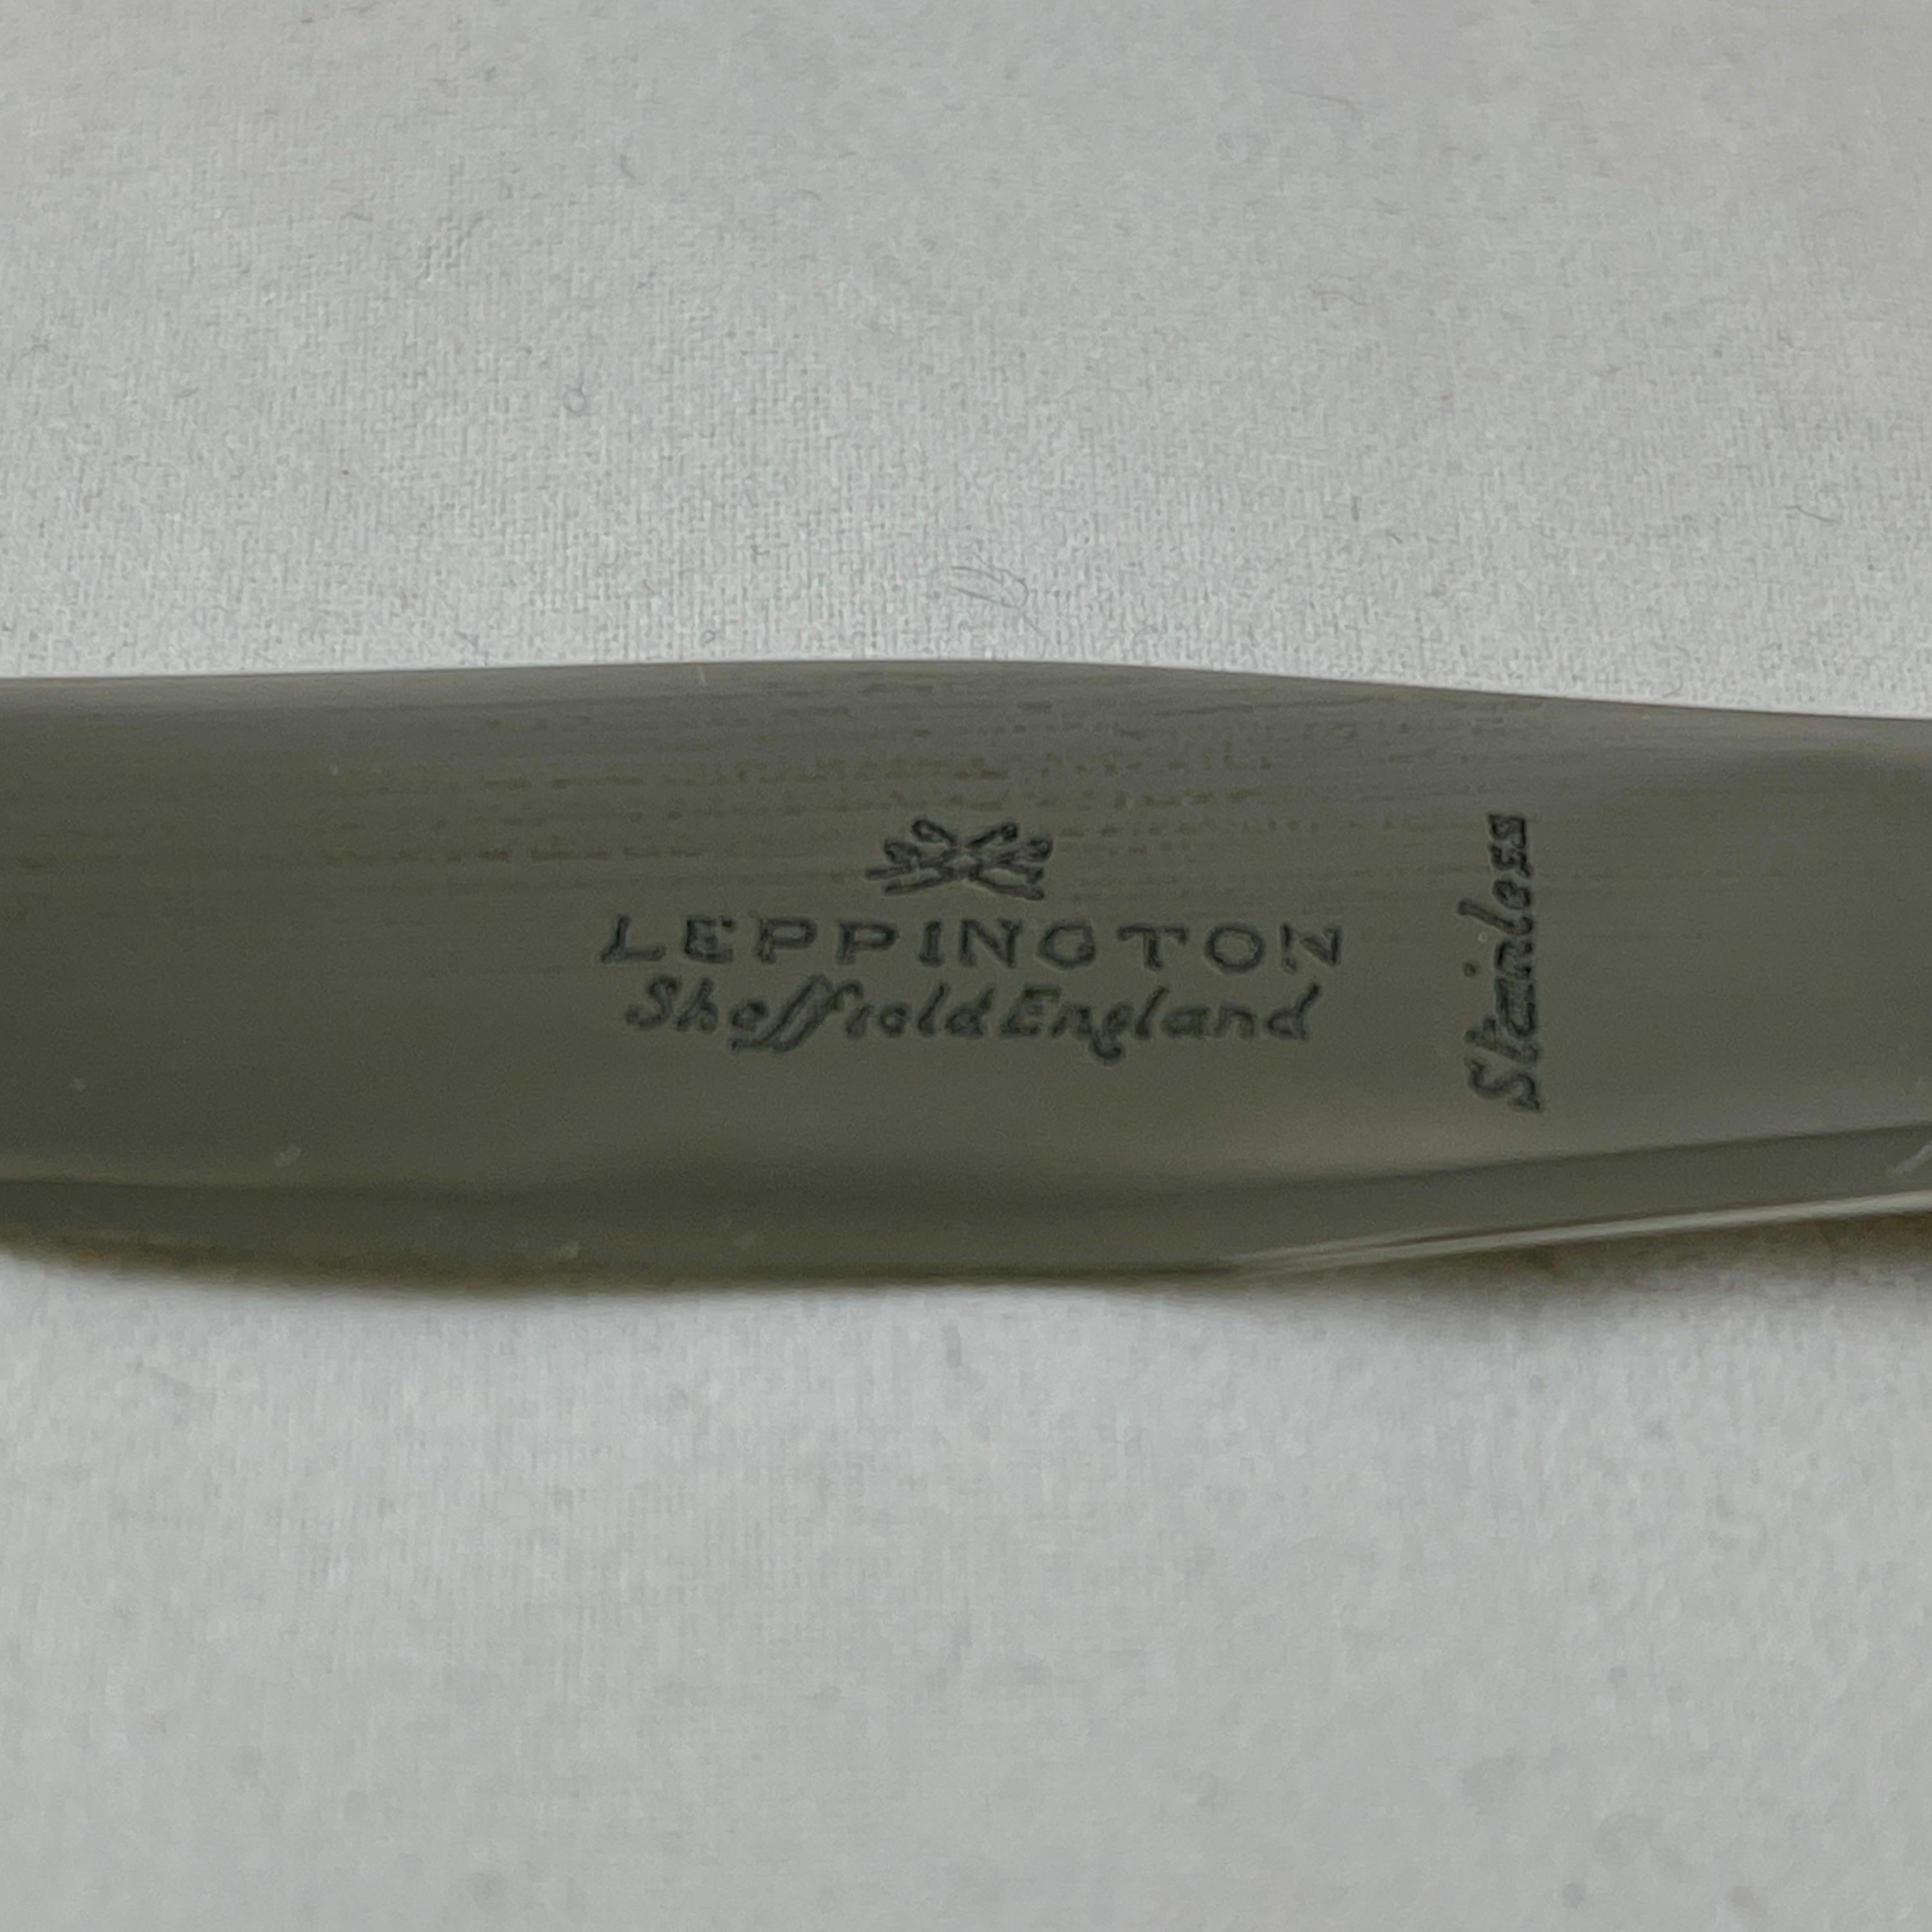 Ceramic Cutlass Leppington Sheffield Stainless and Bone China Spreaders, a Cased Set / 6